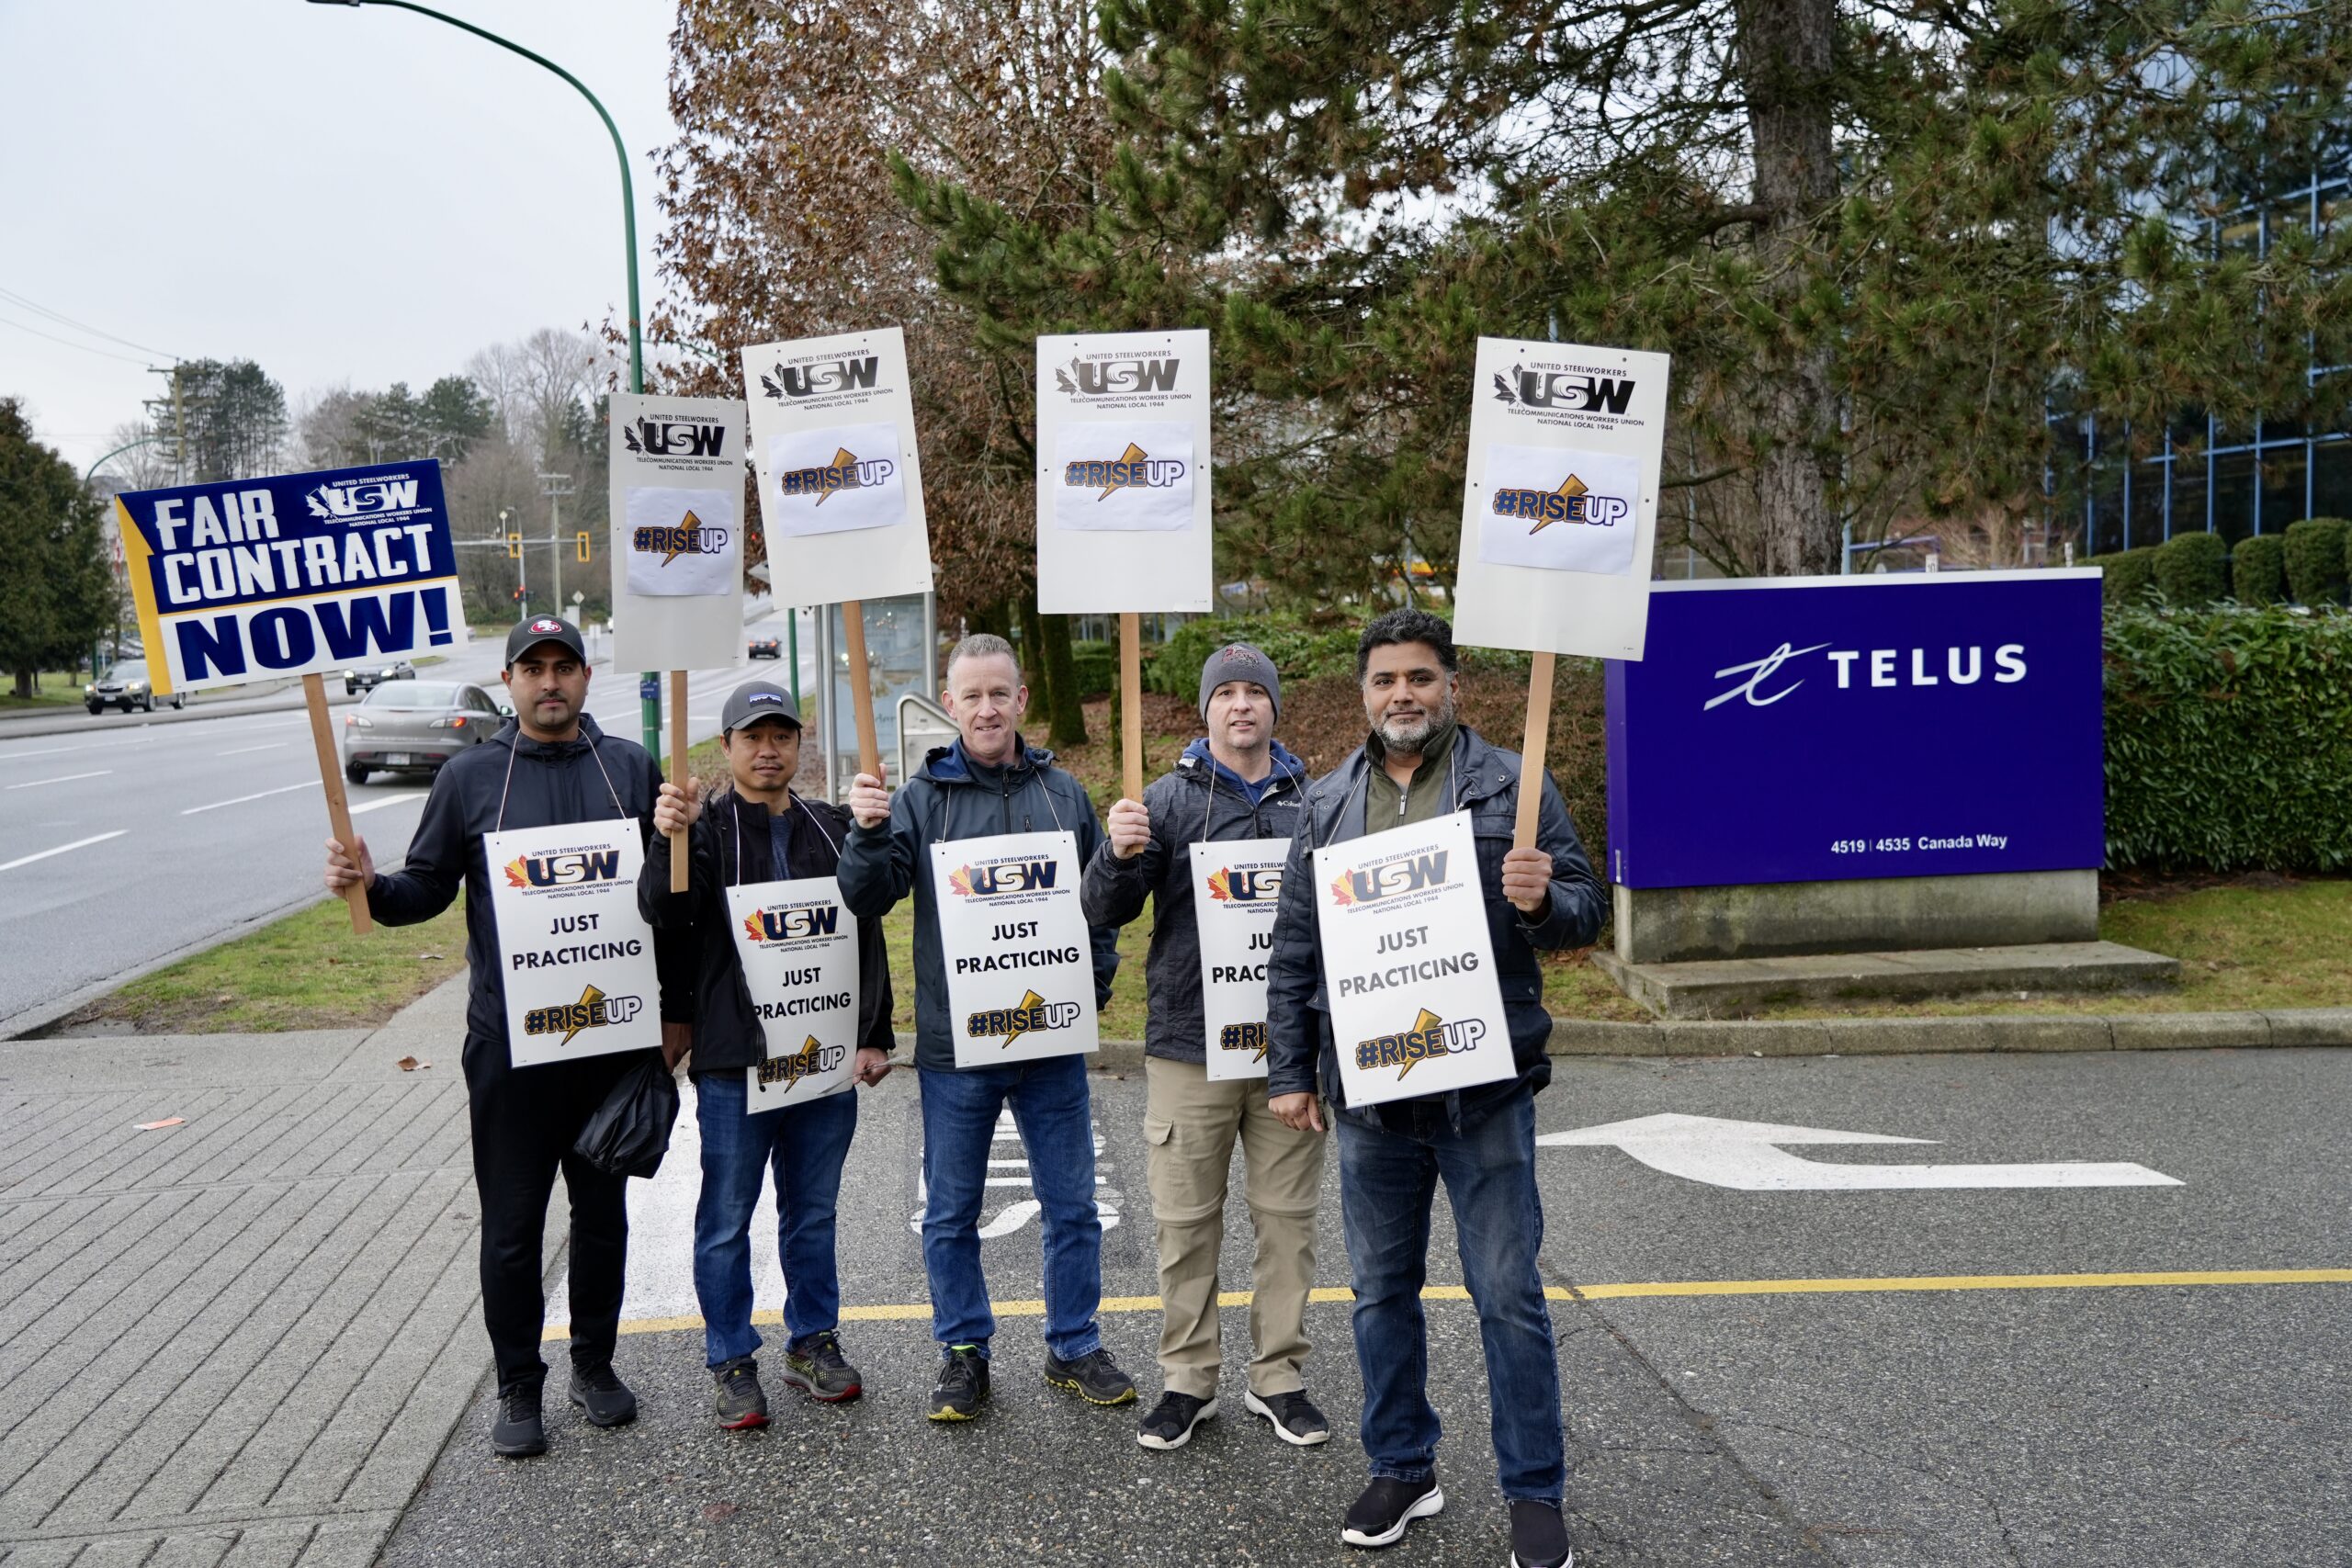 Image: a group of five mean wearing picket signs and holding up signs stand outdoors in the road outside a Telus building. Signs read: Fair Contract Now and Just Praticing.